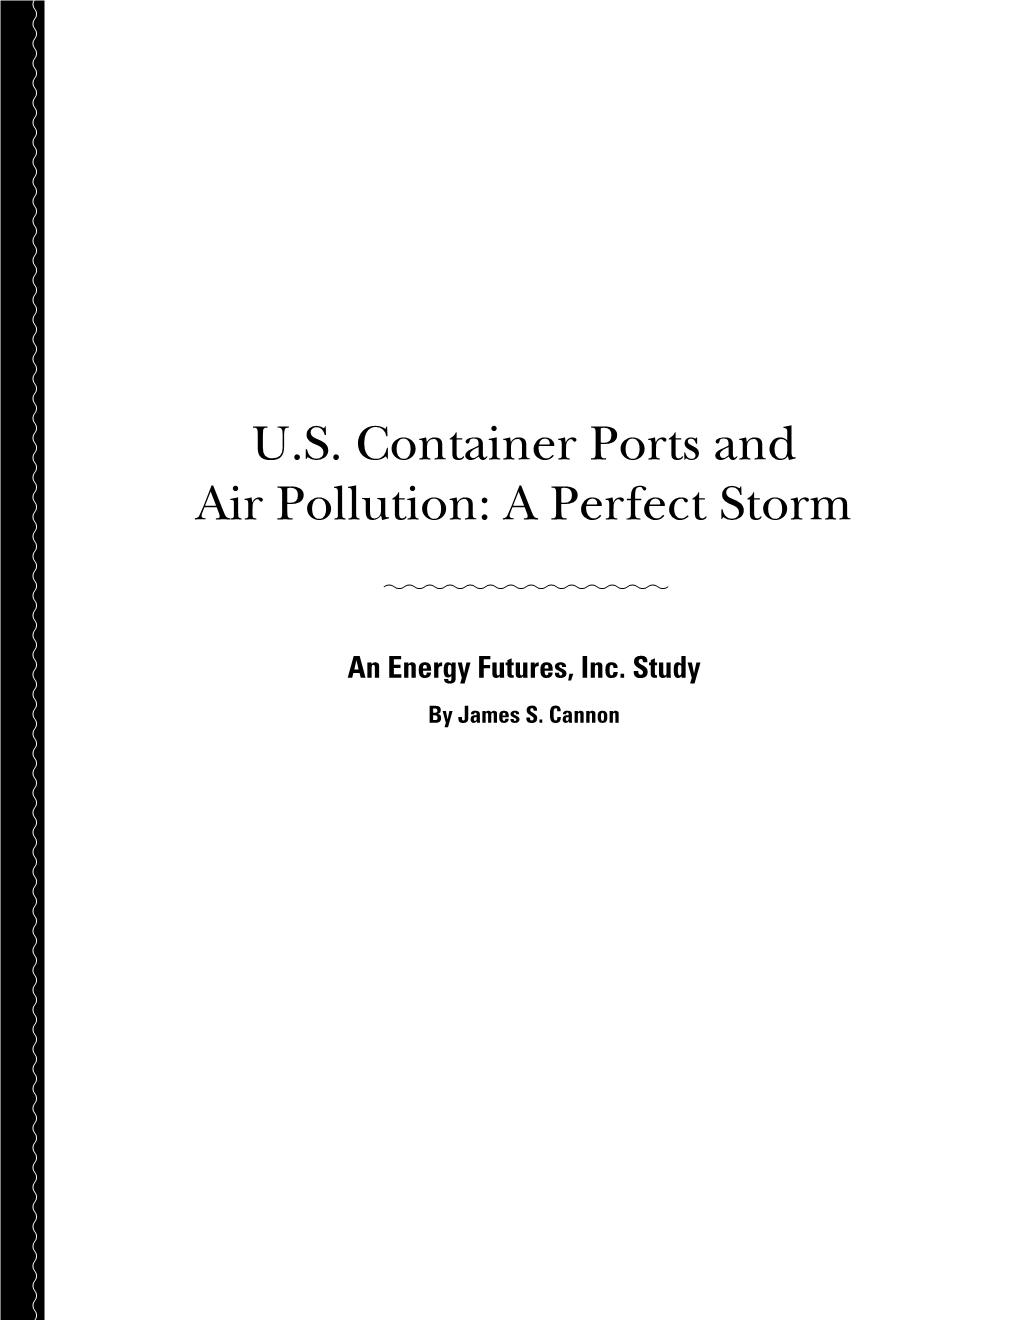 U.S. Container Ports and Air Pollution: a Perfect Storm